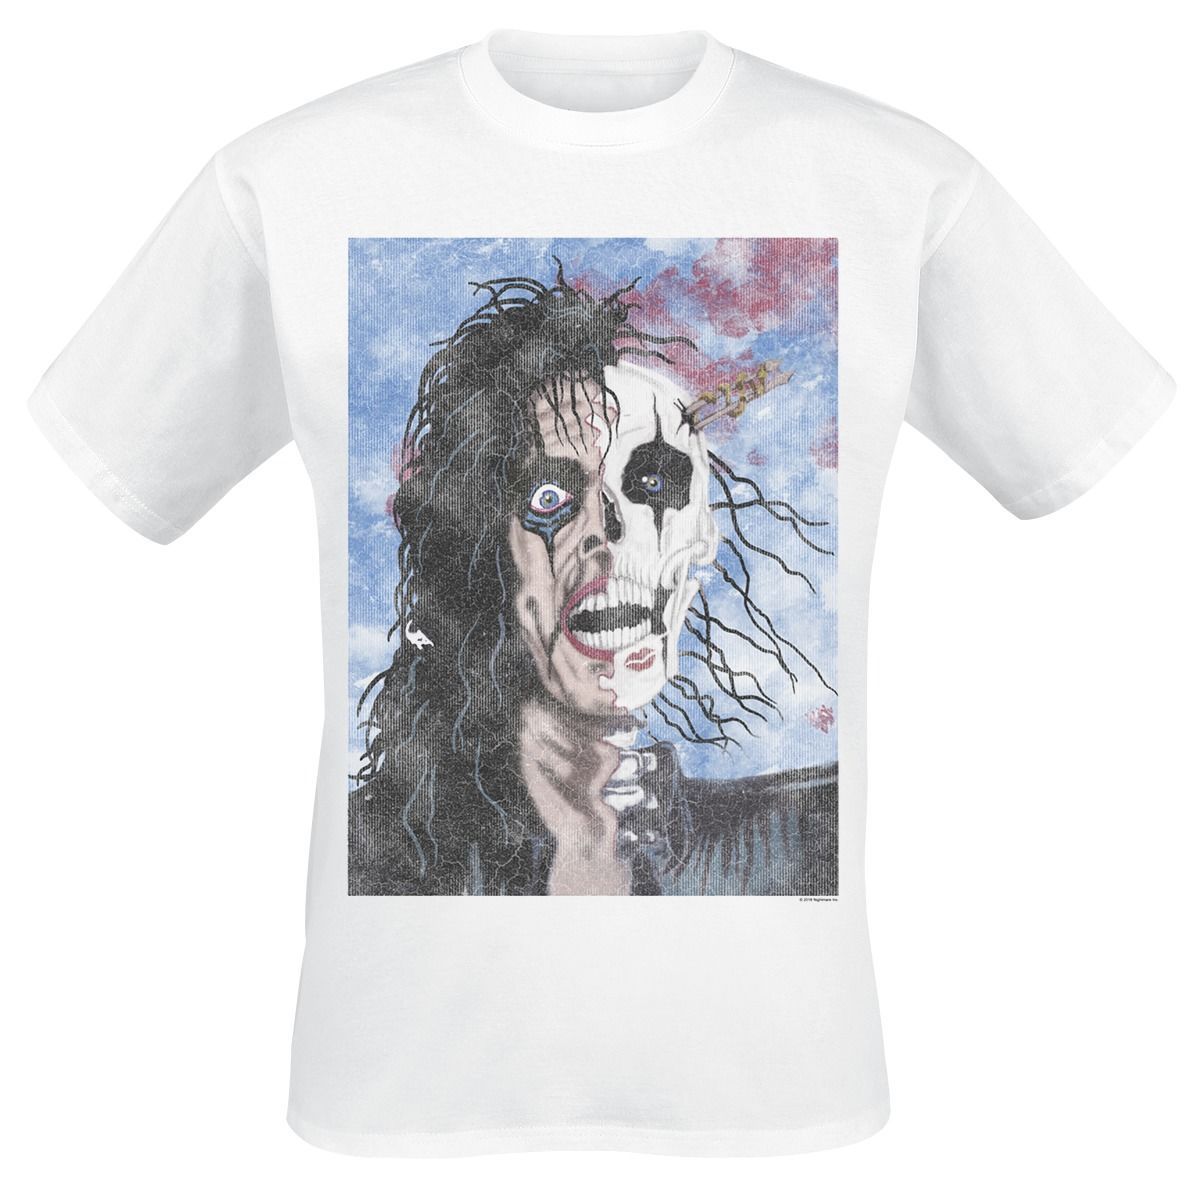 Mens T-Shirt Alice Cooper from The Inside Round Neck Fashion Short Sleeve T-Shirt 